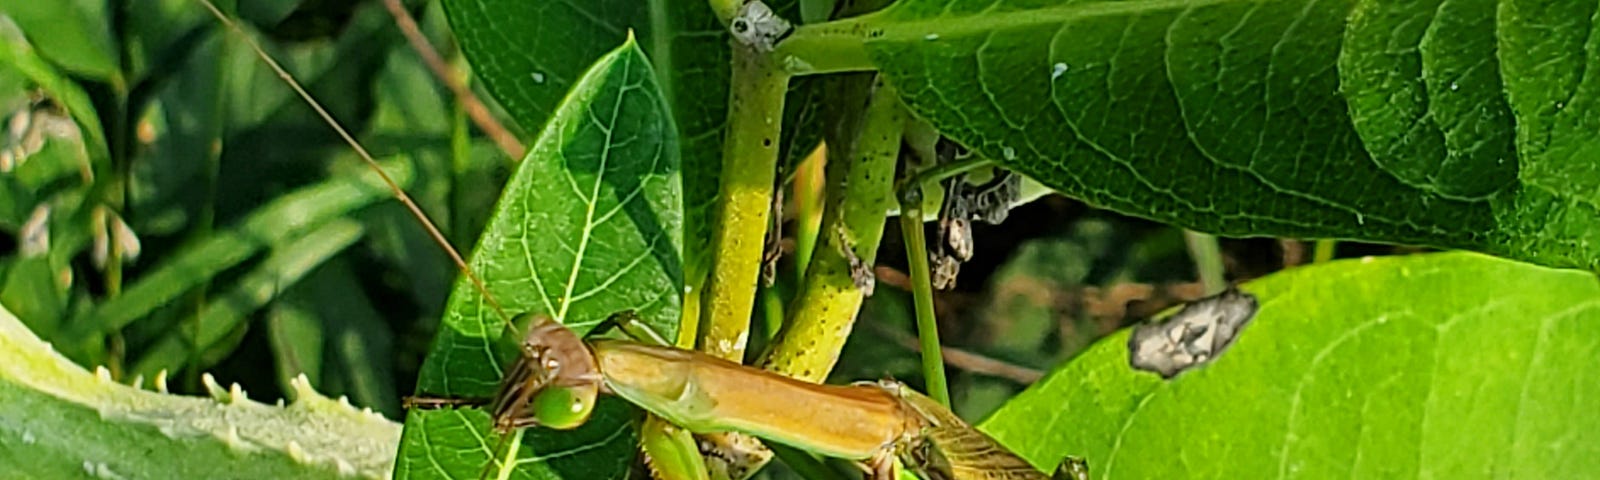 Brown praying mantis with green eyes on the leaf of a milkweed plant